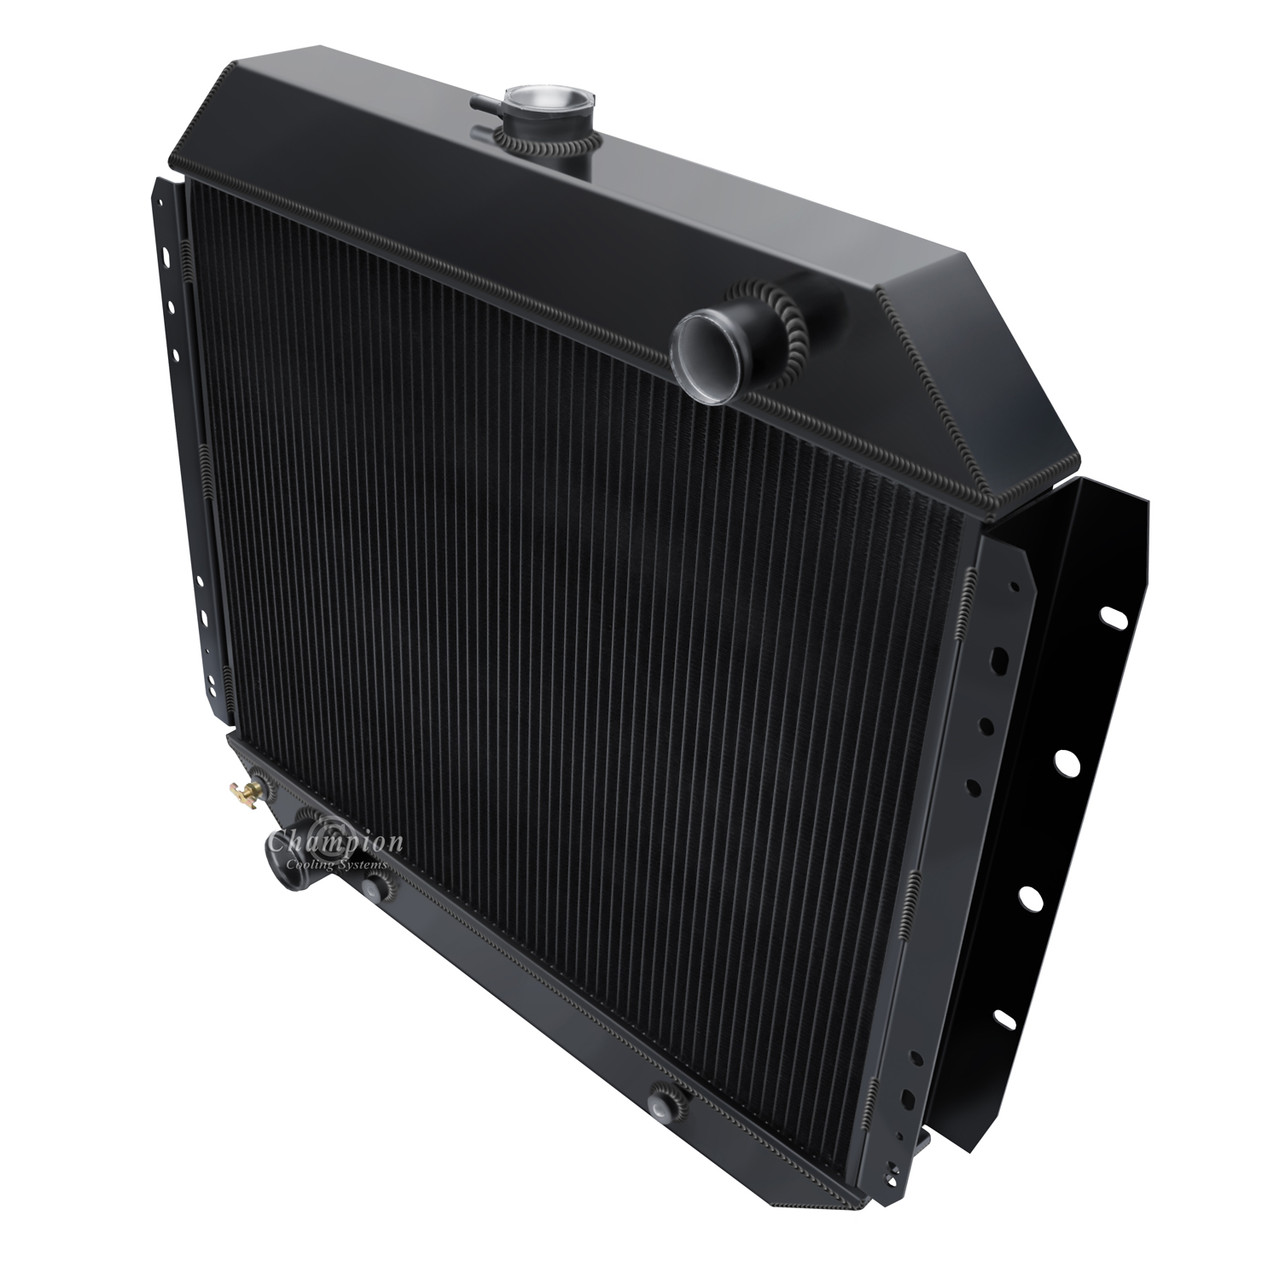 Details about   3 Row Performance Champion Radiator for 1968-1979 Ford F-Series V8 Engine